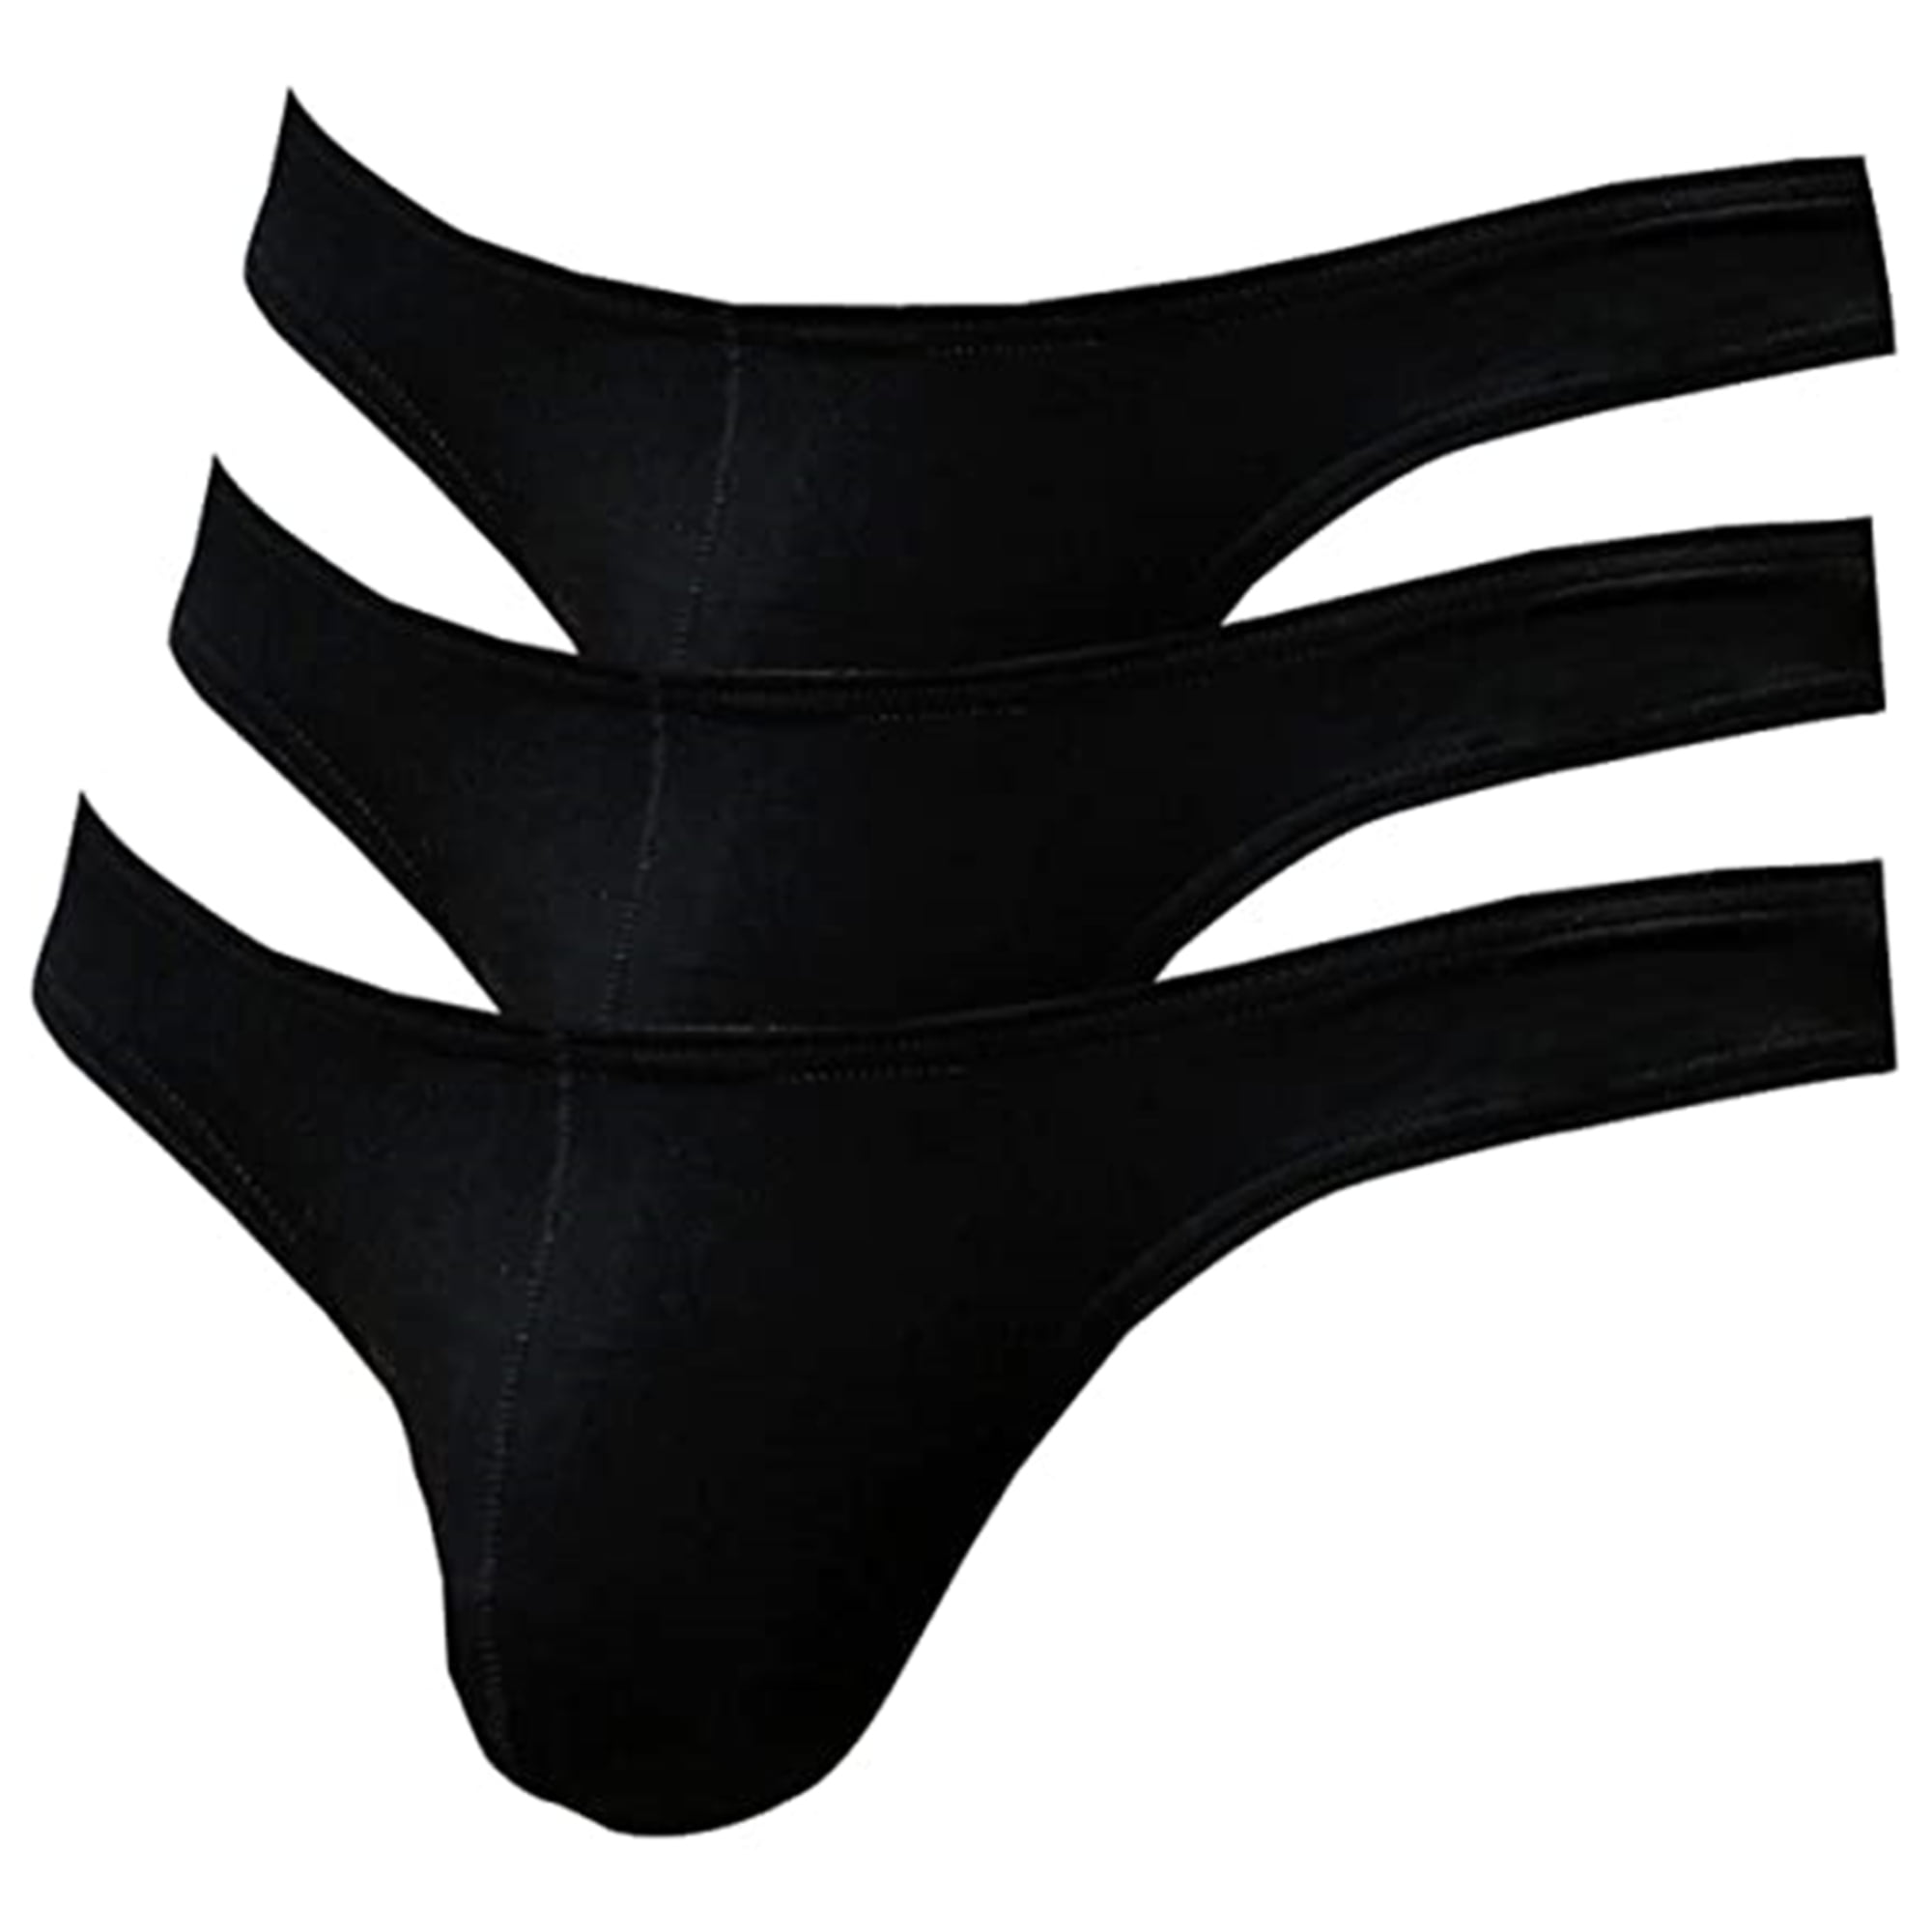 Buy HuDuuM Mens G String G String Thong for Men Stretchable and Comfortable  Soft Fabric Black 07049-BK Size-Small-7049 at